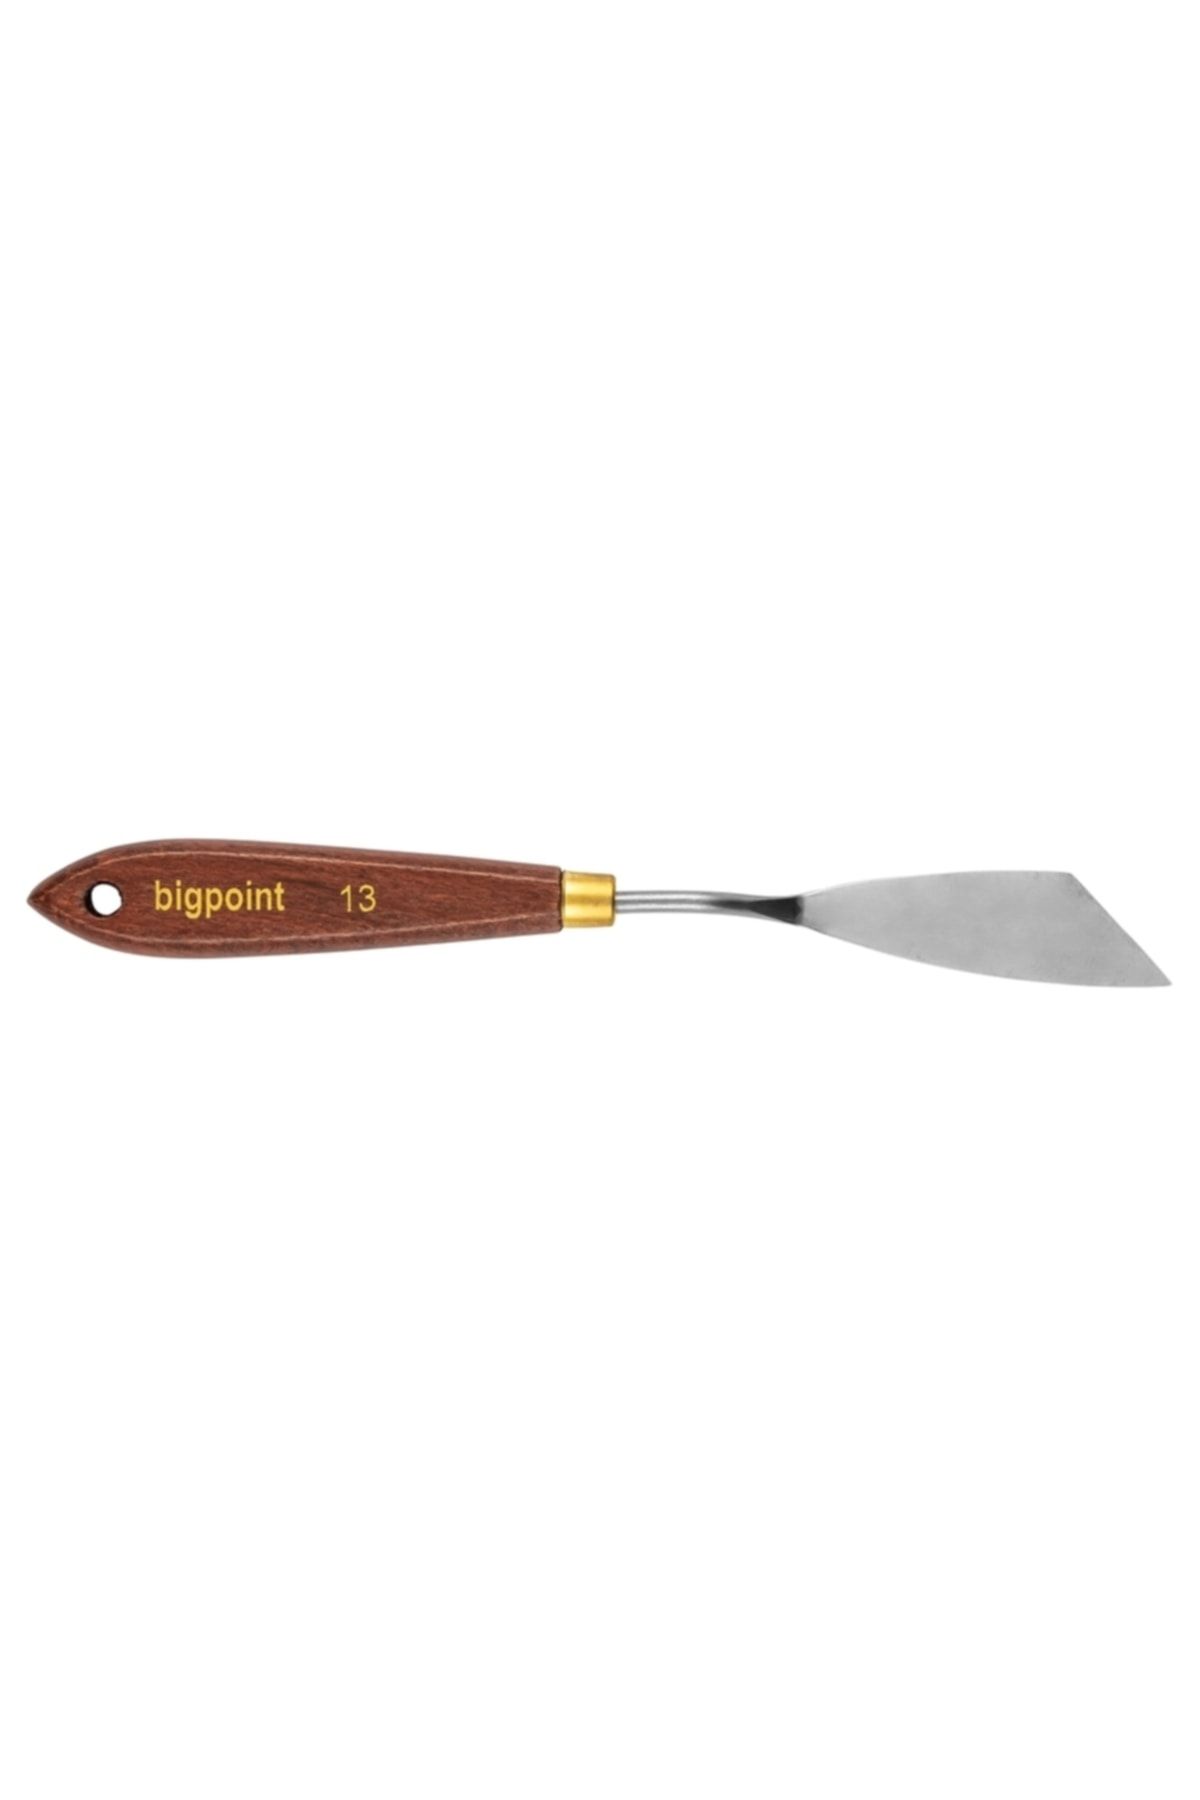 Bigpoint Metal Spatula No: 13 (painting Knife)